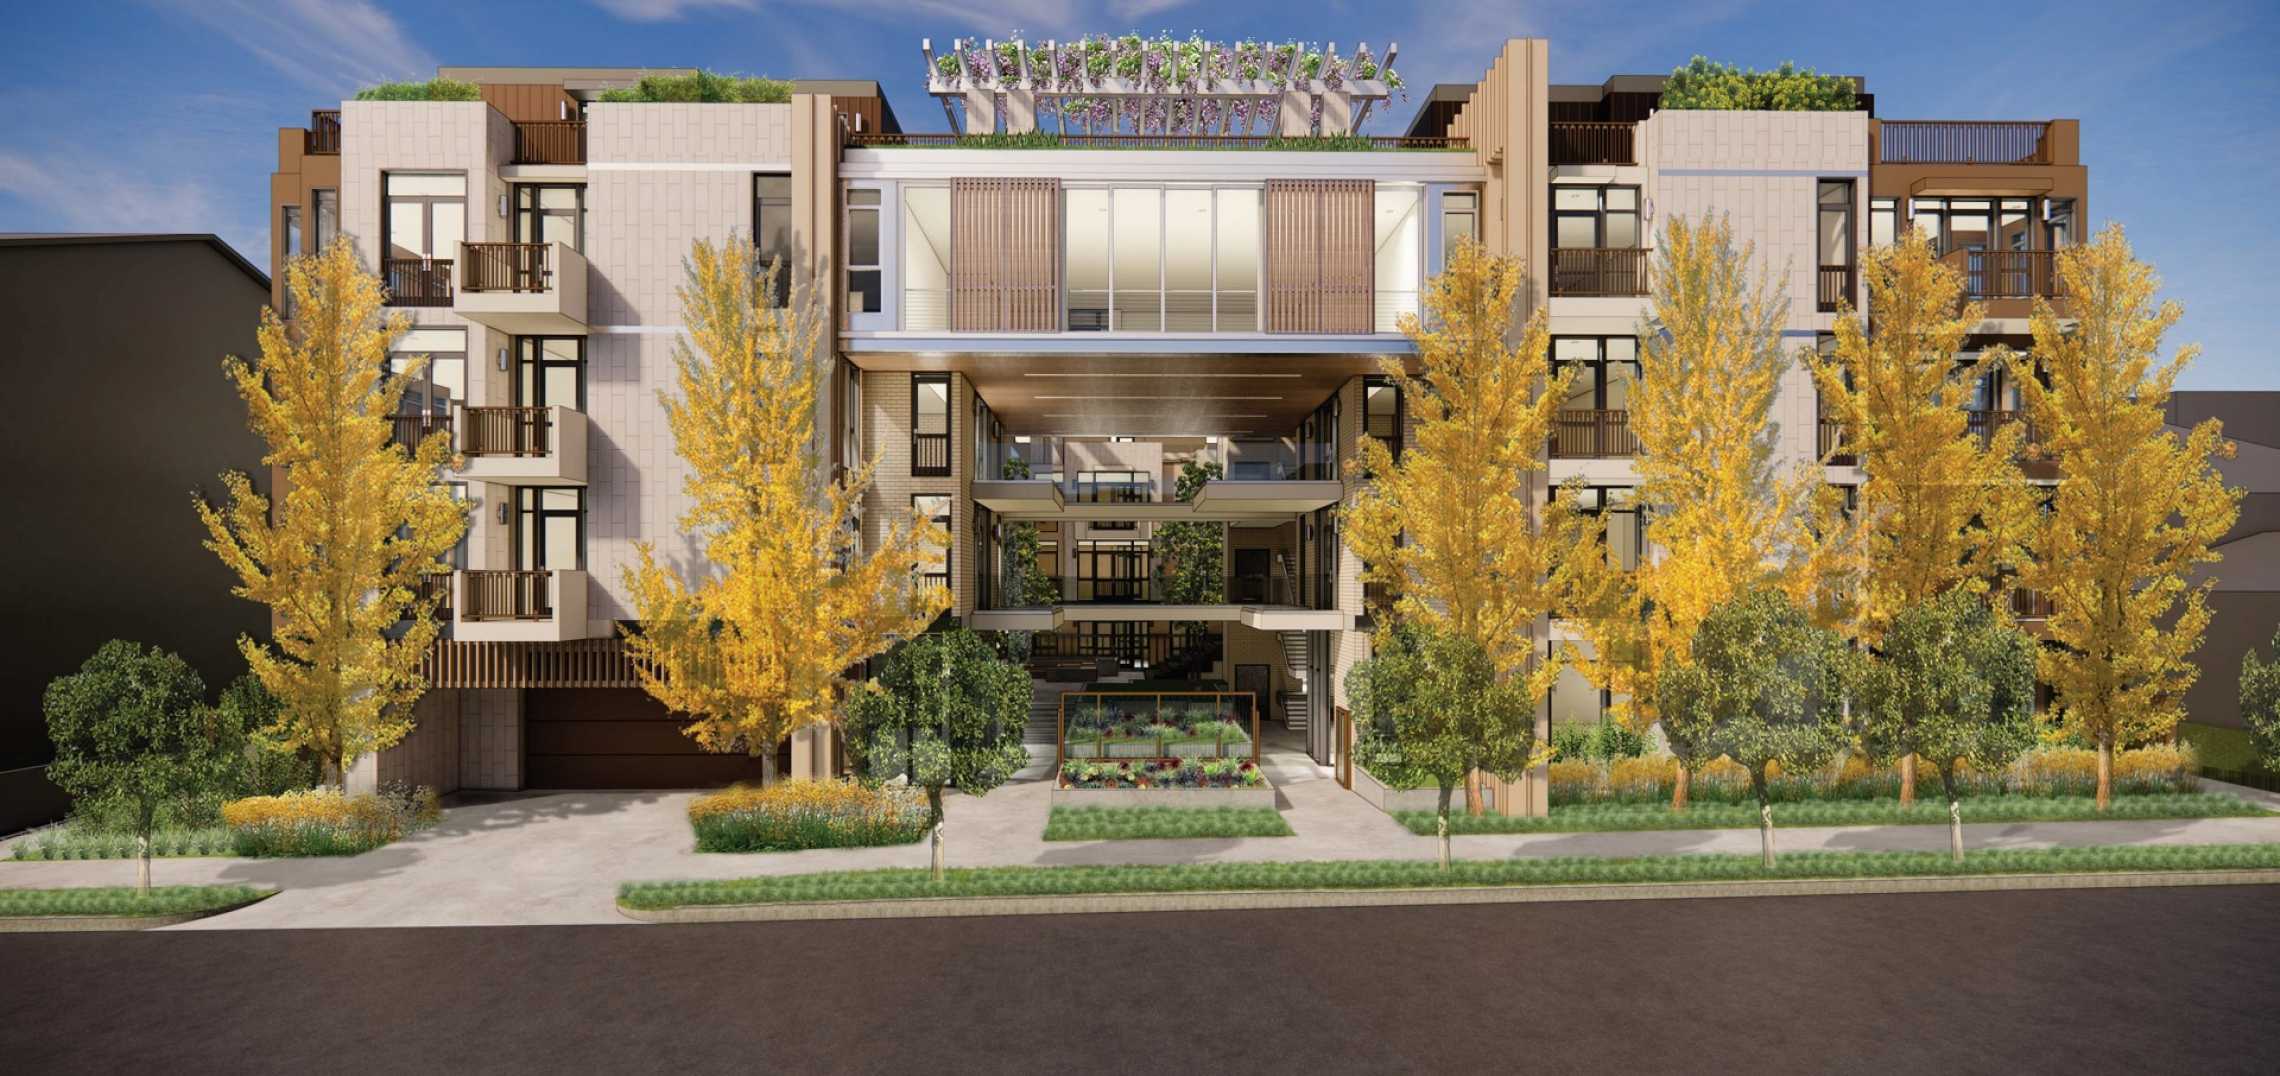 New Look for Proposed Development in Pasadena Playhouse District